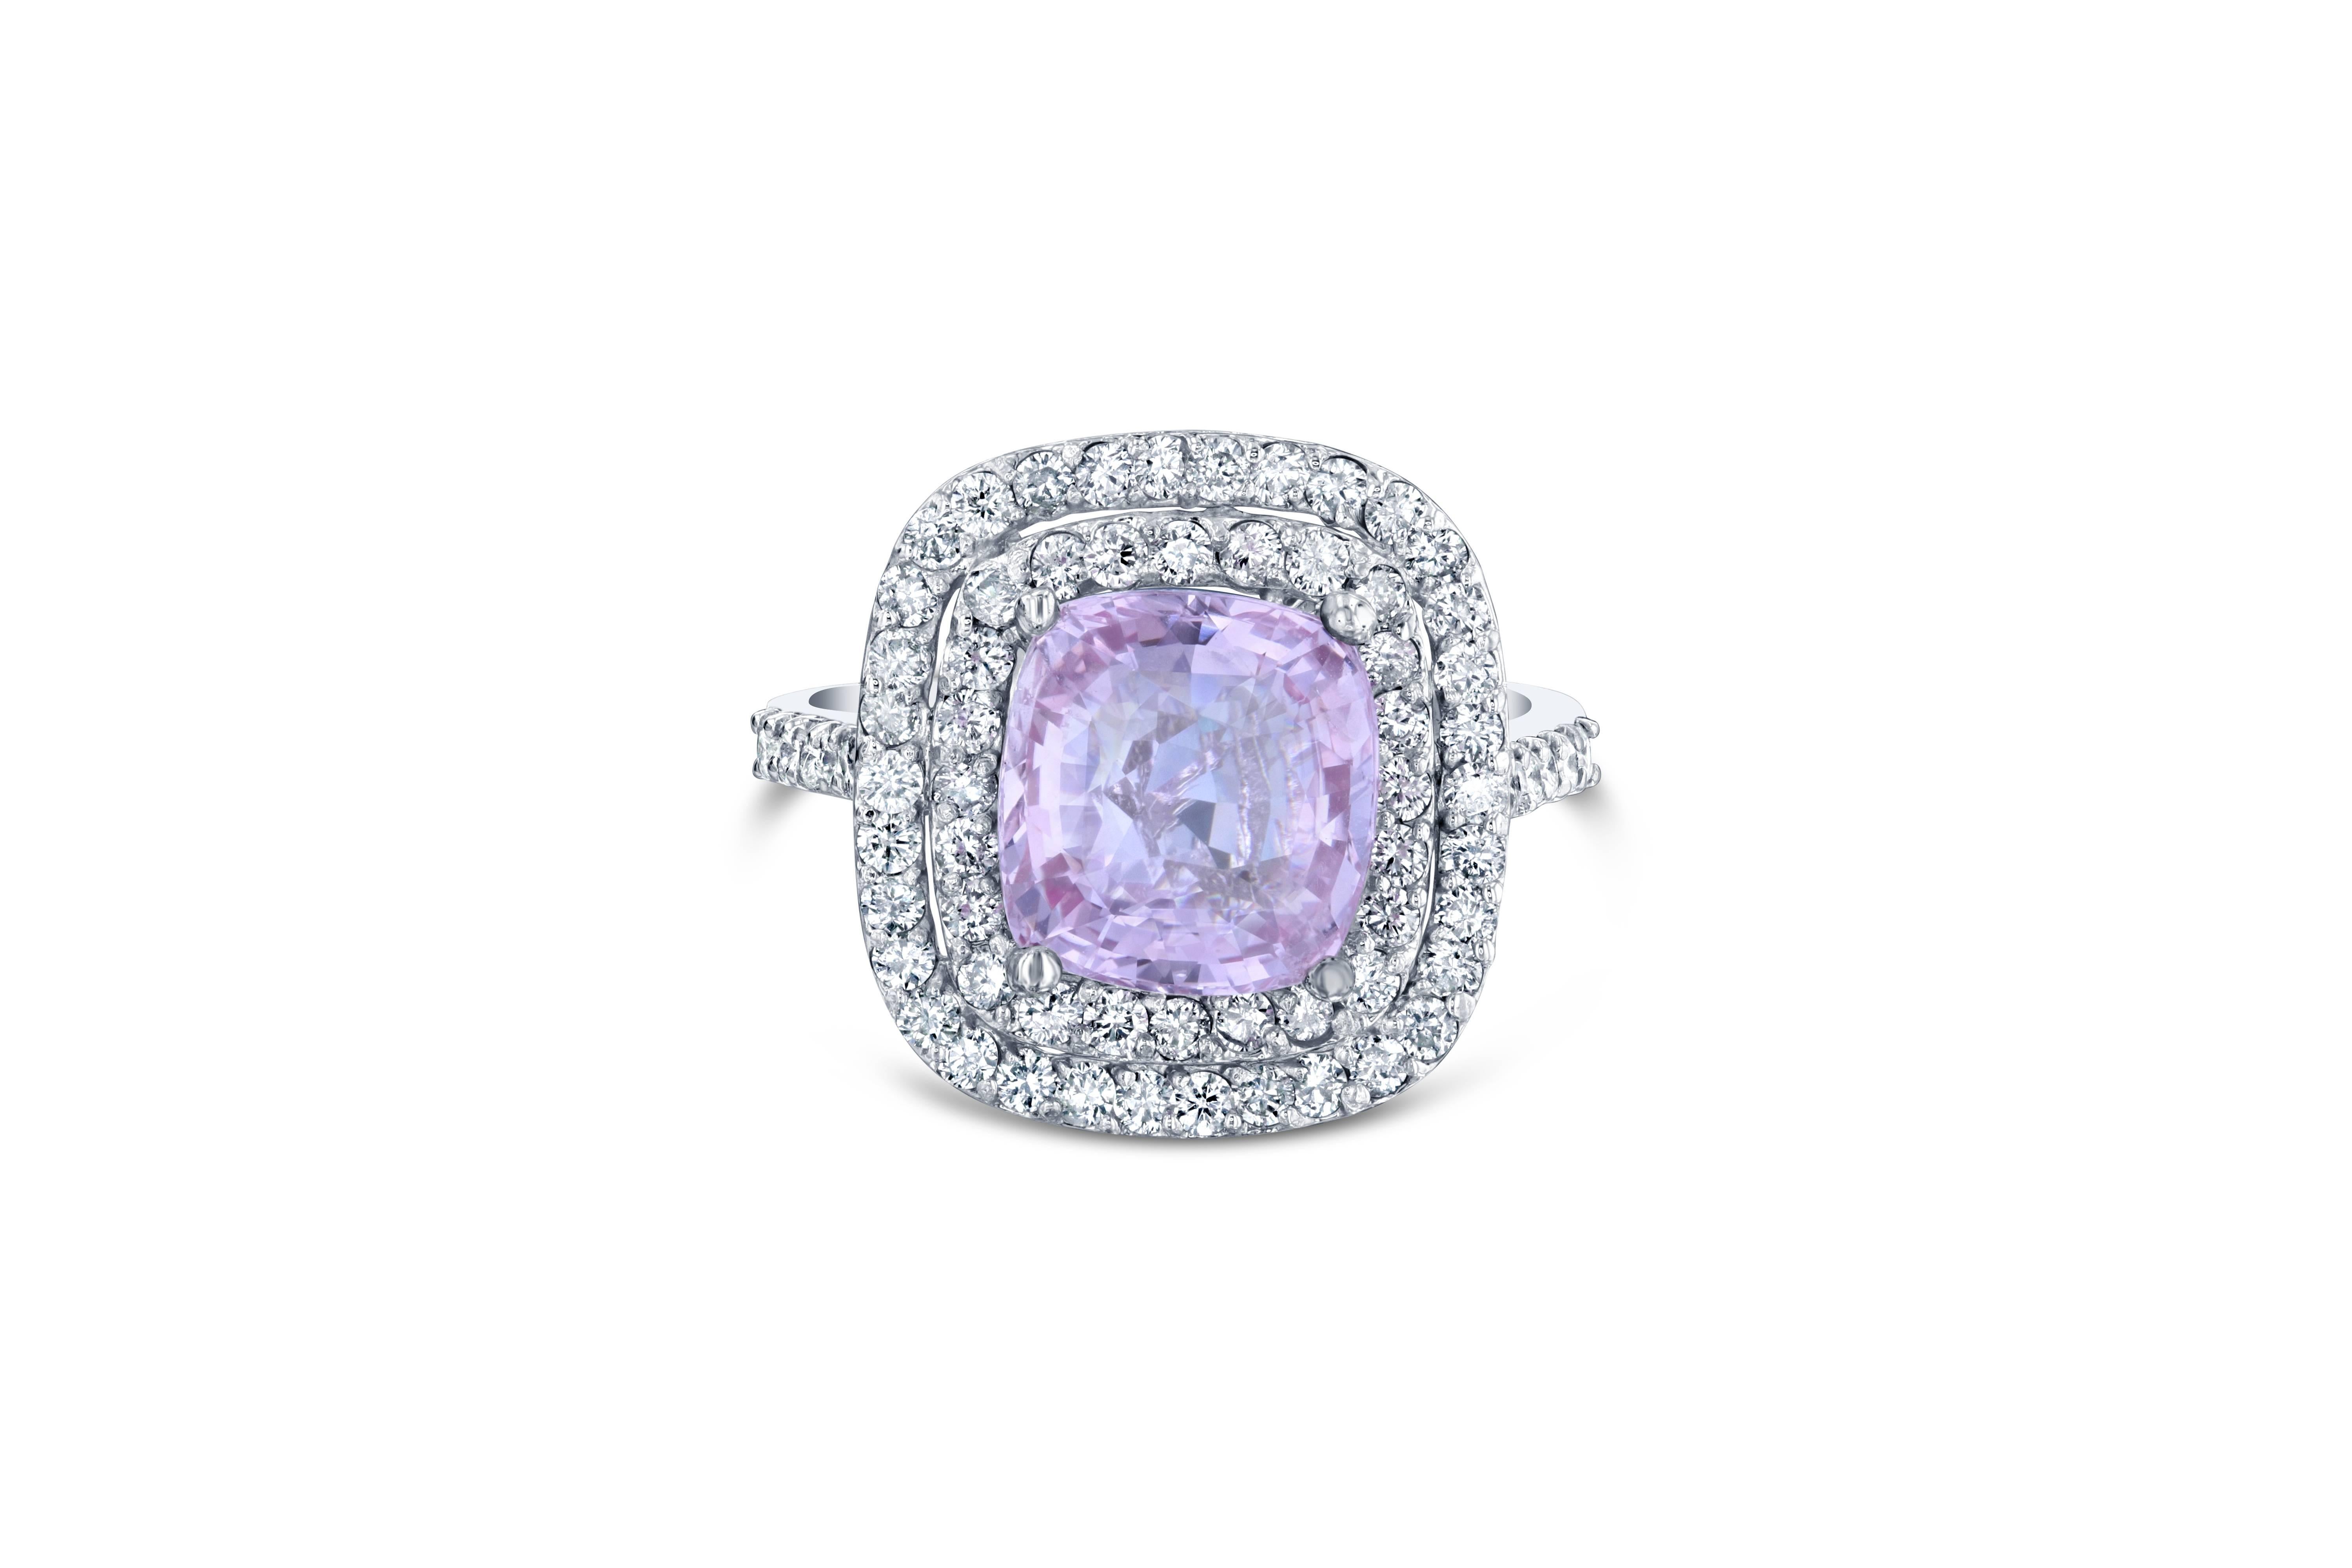 Gorgeous double halo engagement ring alternative! This ring has a Cushion Cut 4.70 carat Pink Sapphire in the center of the ring and is surrounded by a double halo of 72 Round Cut Diamonds that weigh 1.05 carats (Clarity: SI2, Color: F). The total